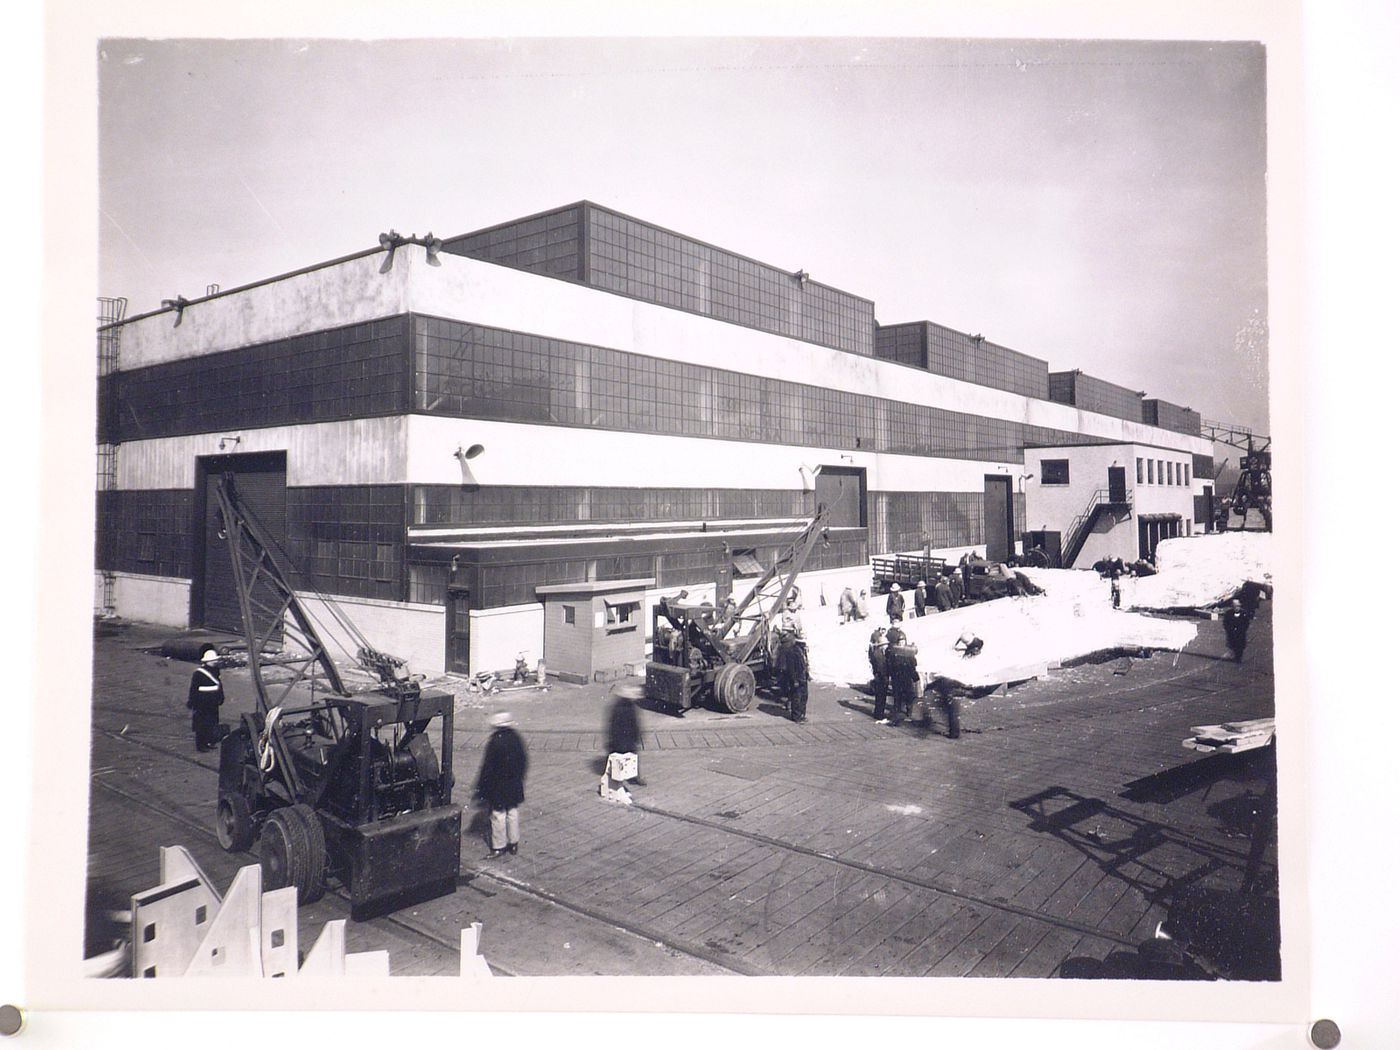 View of the principal and lateral façades of the Manufacturing Building, Todd Shipyards Corporation Assembly Plant, Hoboken, New Jersey